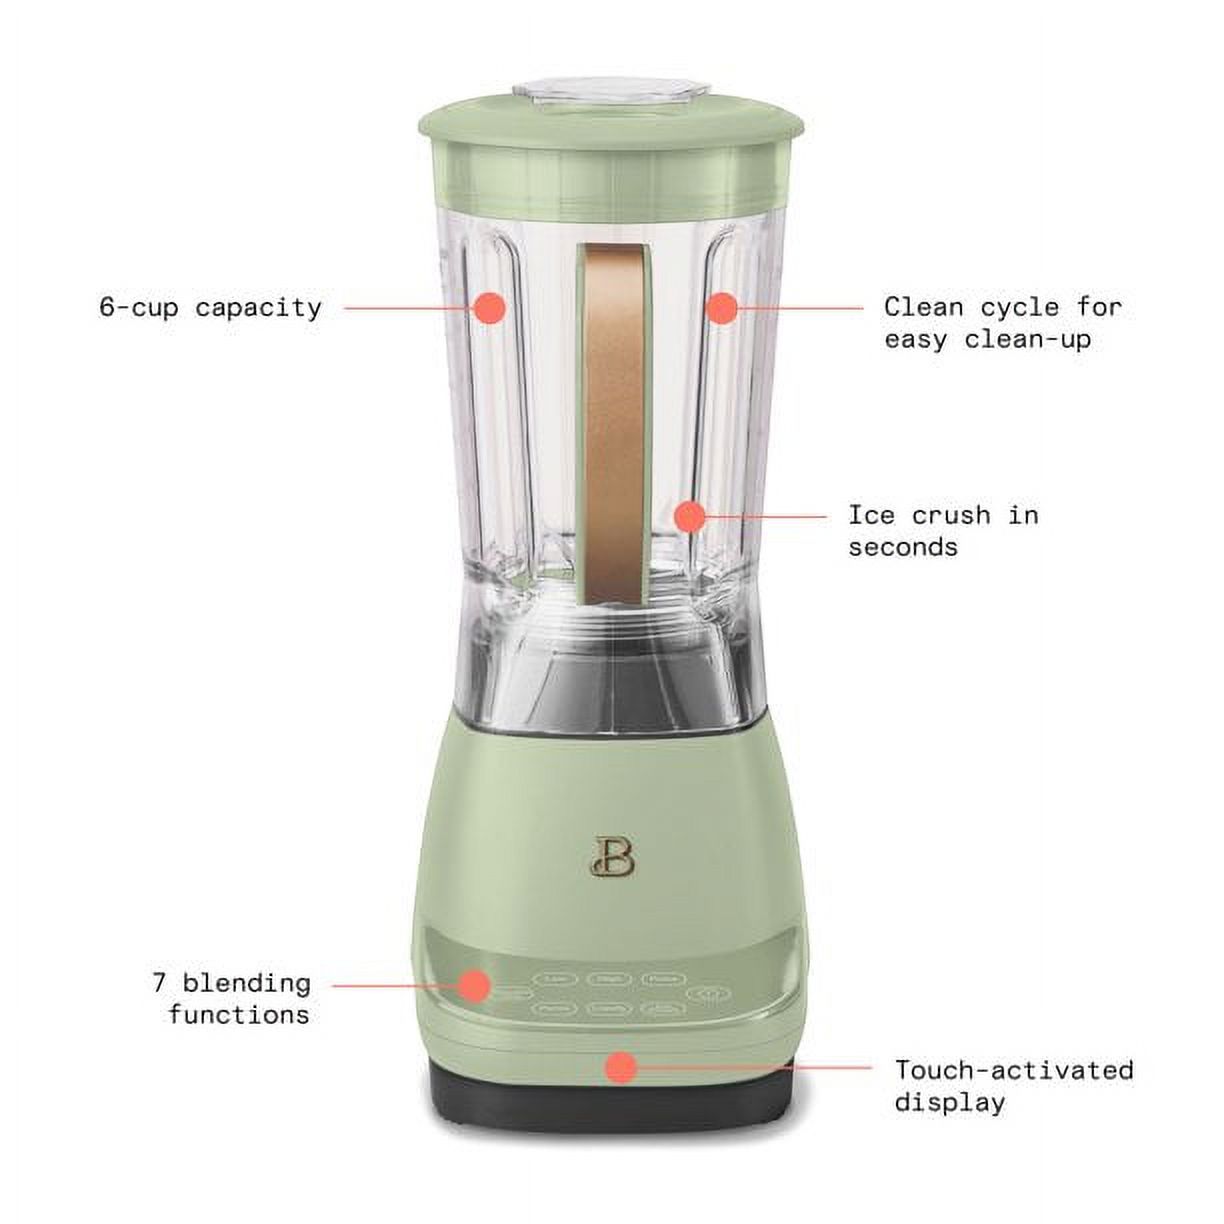 Beautiful High Performance Touchscreen Blender, Sage Green by Drew Barrymore - image 3 of 8